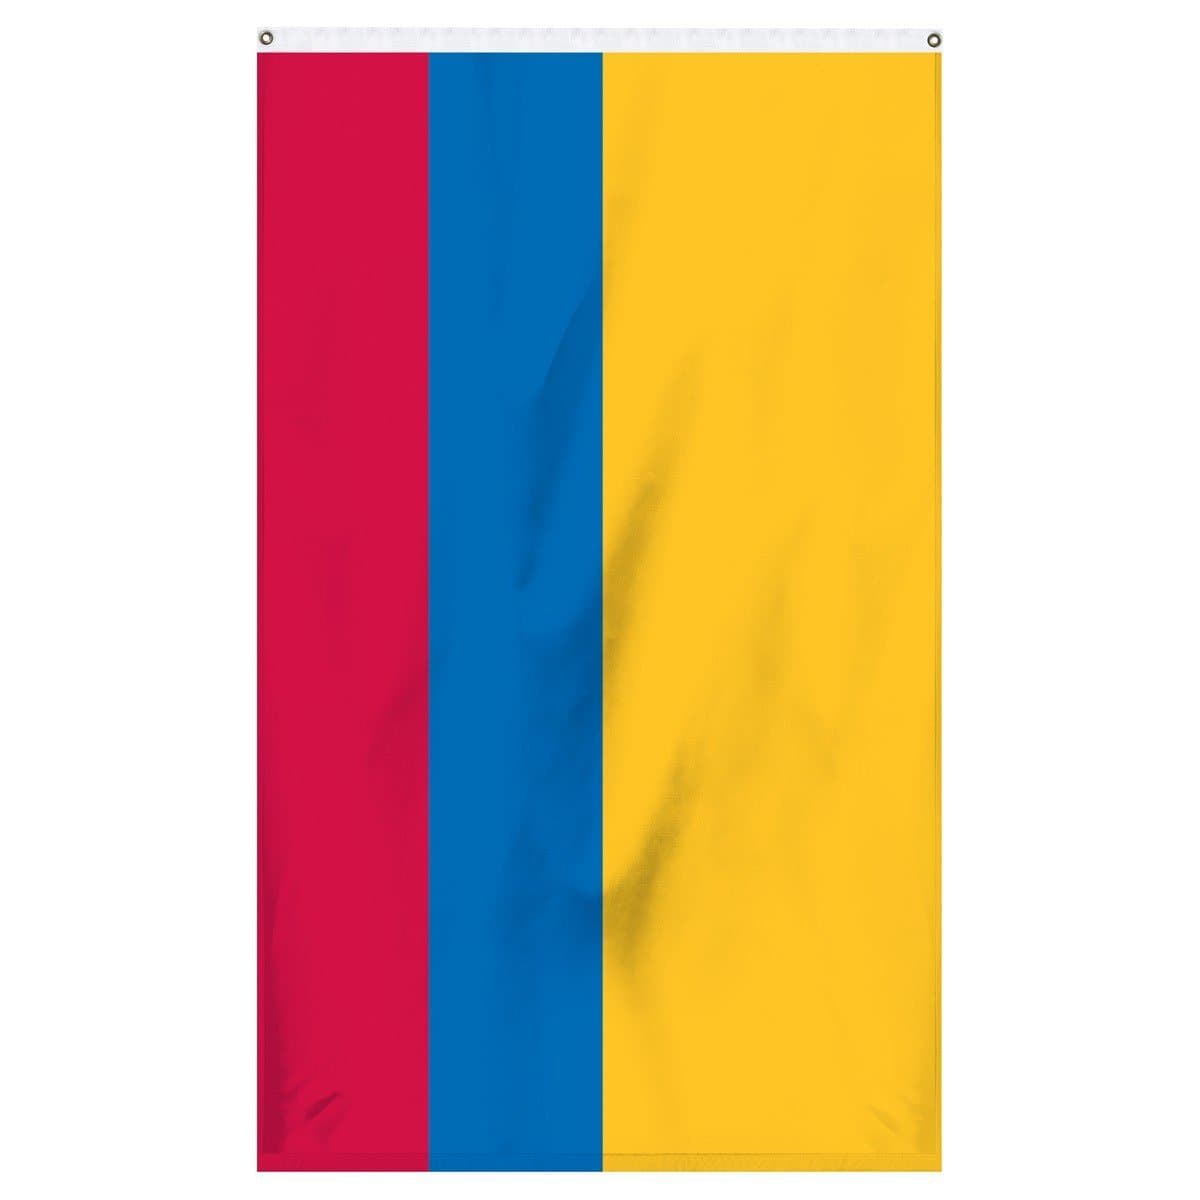 National flag of Colombia for sale for collectors, flag poles, and parades